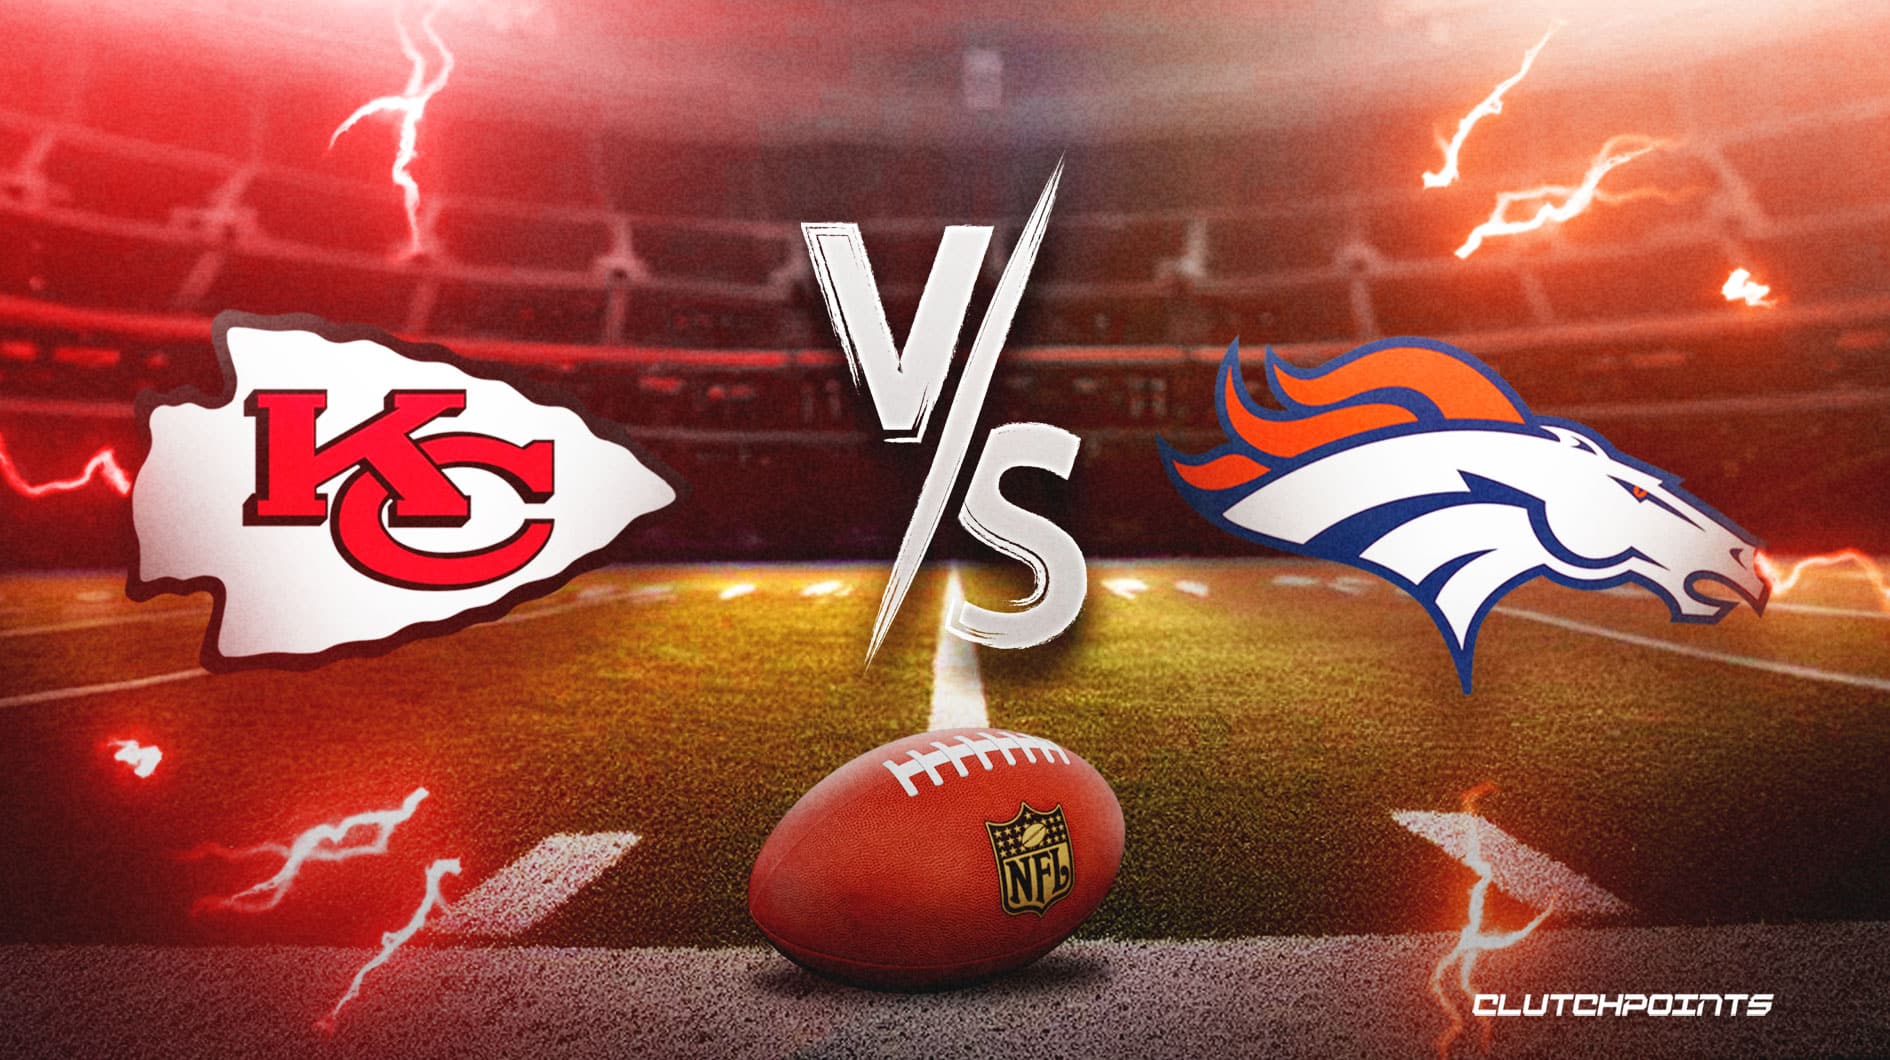 ChiefsBroncos prediction, odds, pick, how to watch NFL Week 8